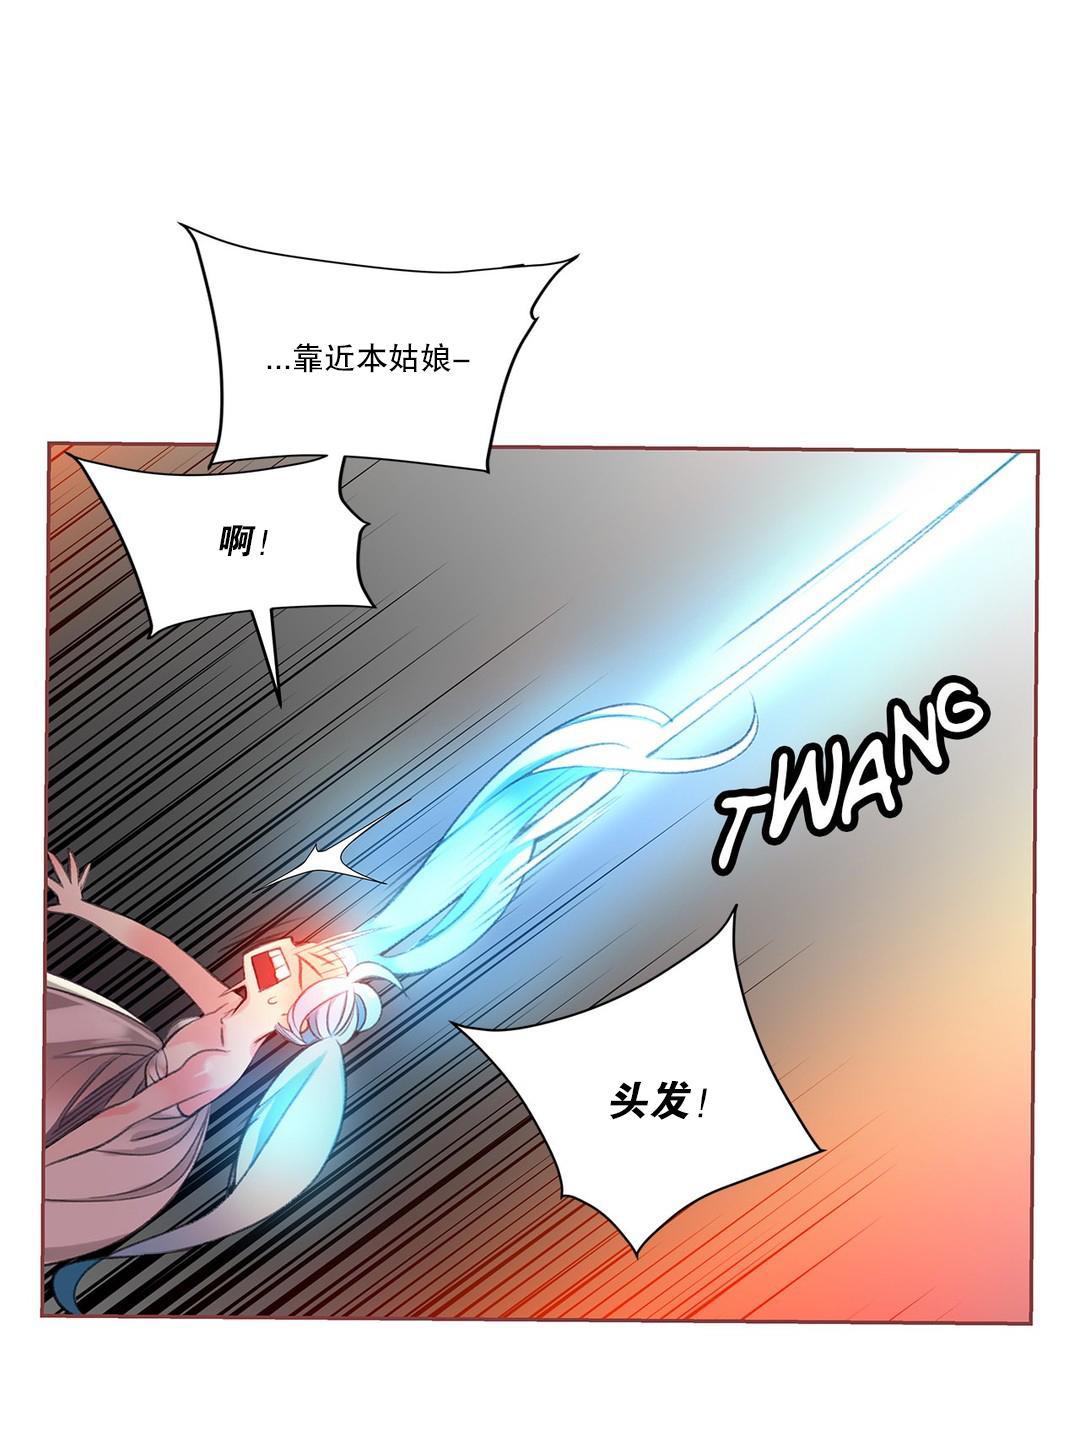 [Juder] Lilith`s Cord (第二季) Ch.61-66 [Chinese] [aaatwist个人汉化] [Ongoing] page 10 full